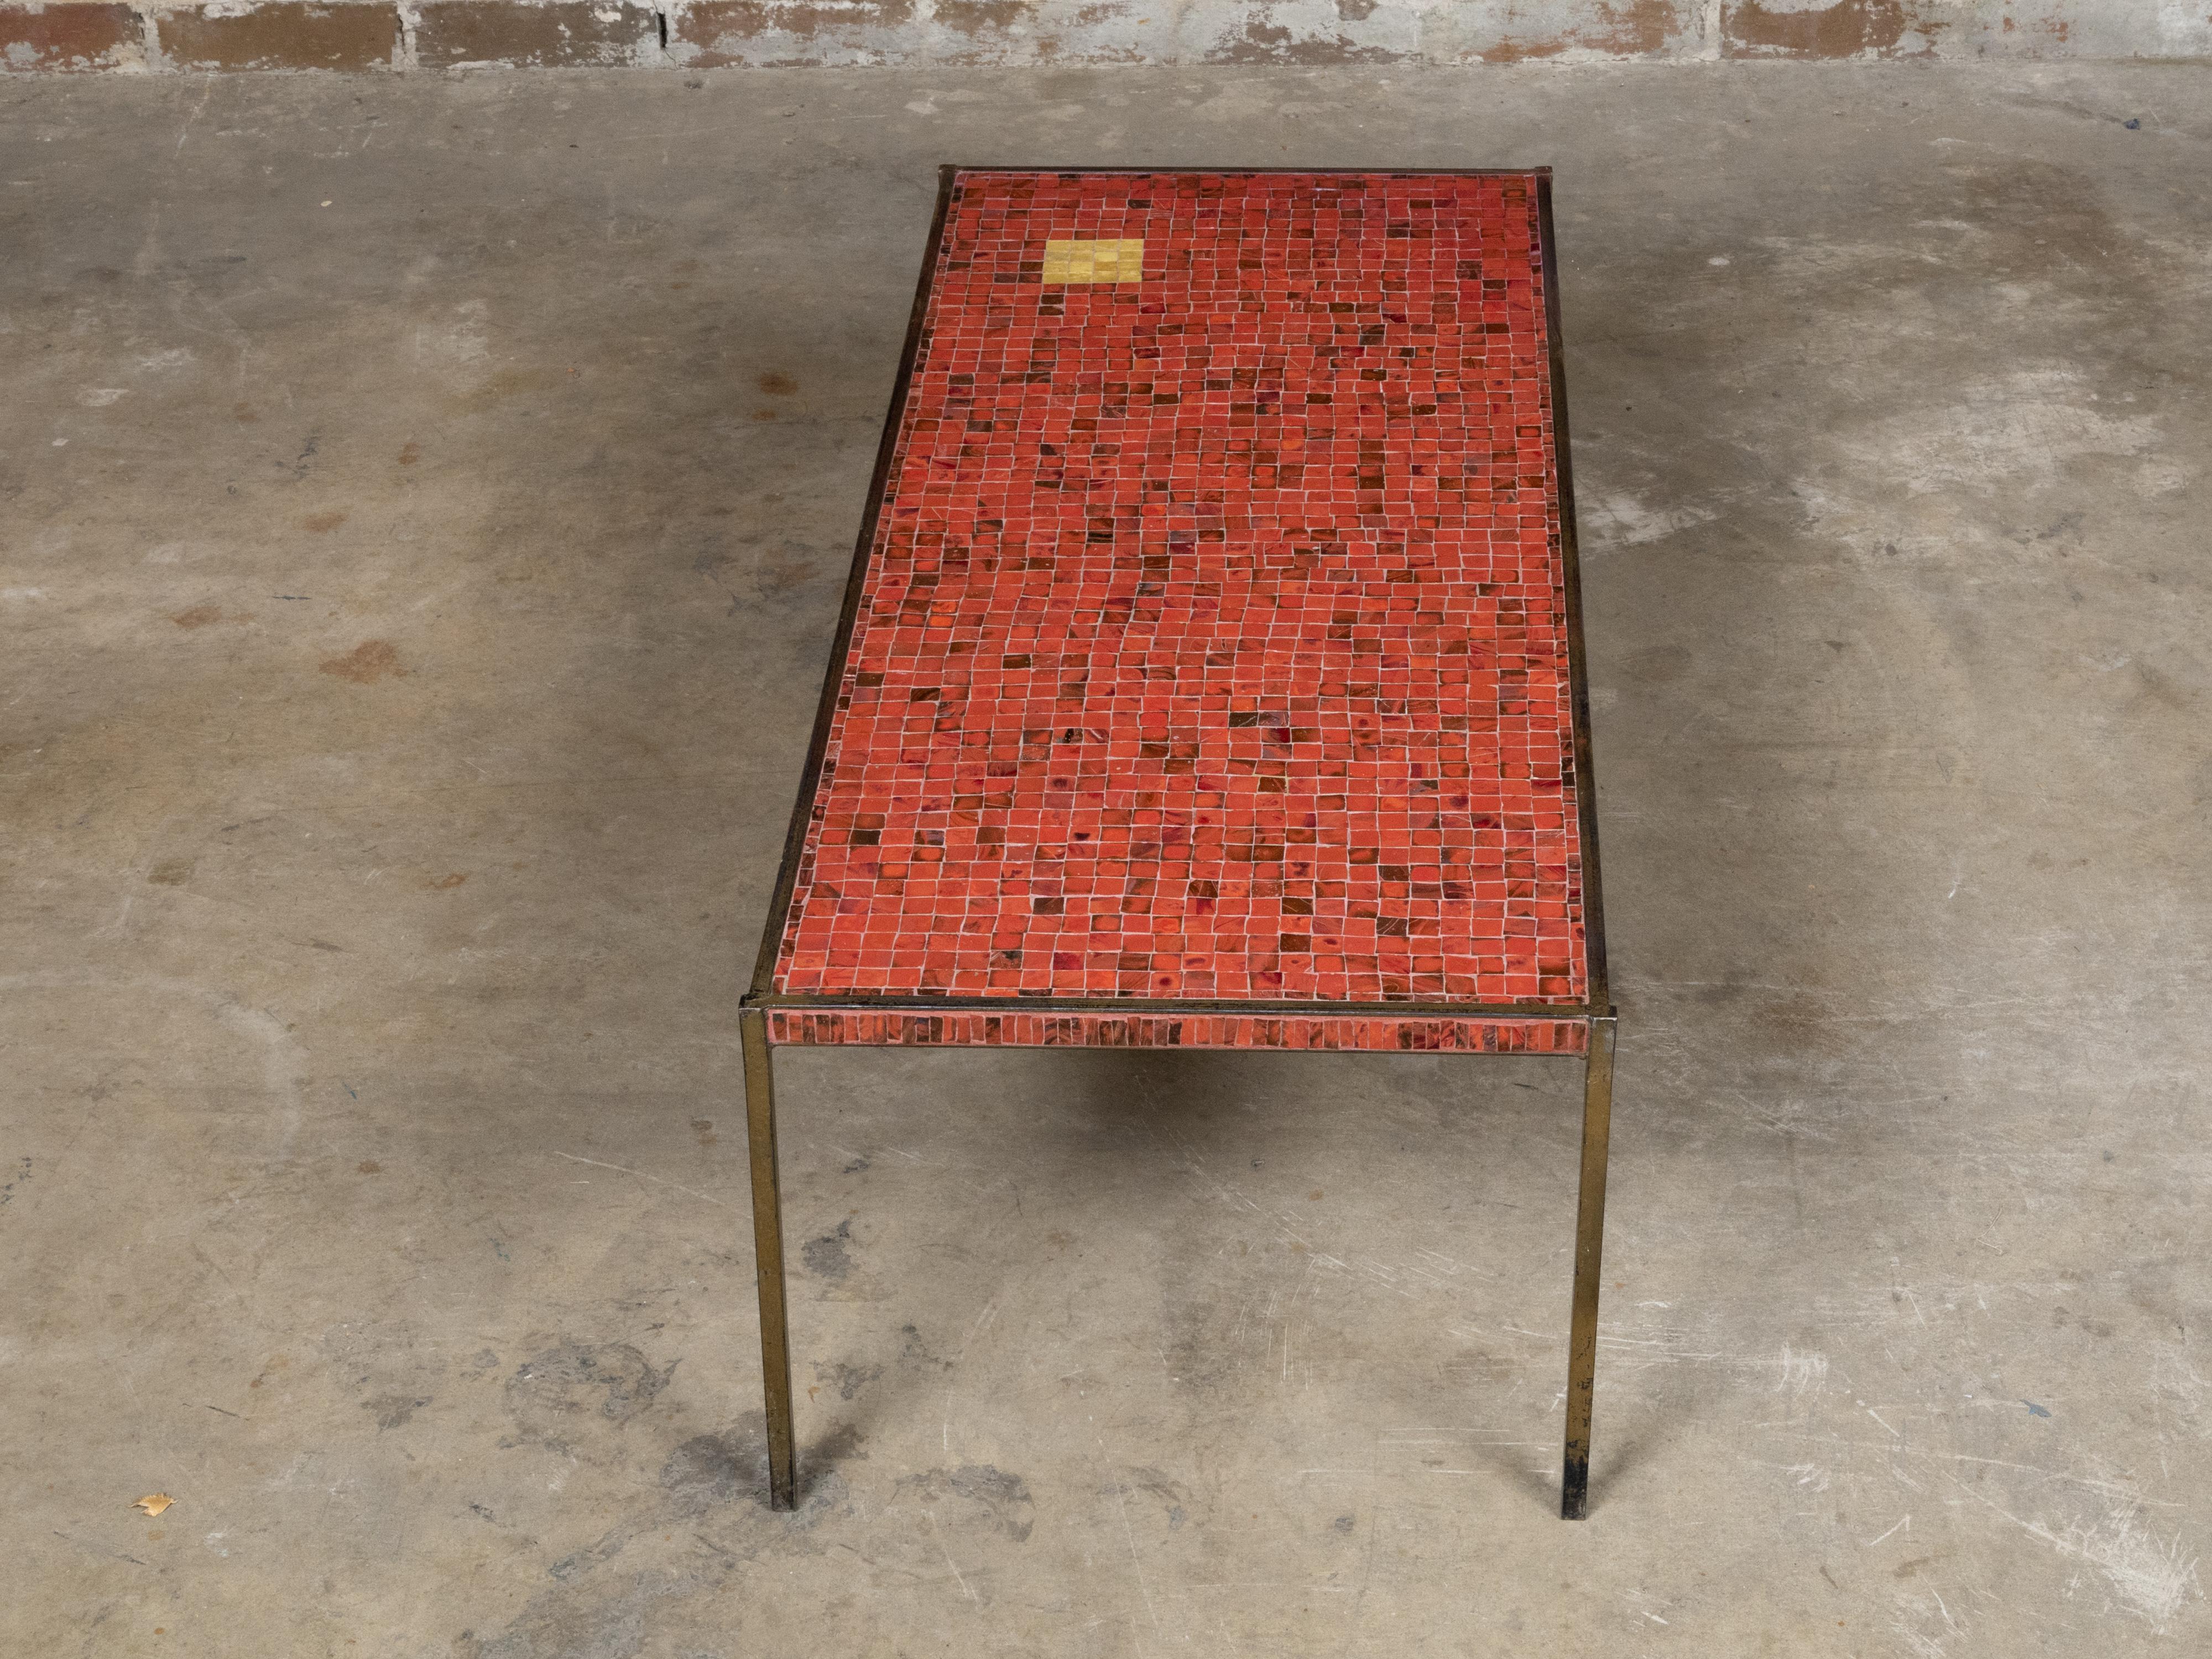 Gilt Midcentury Italian Mosaic Table with Iron Base and Red Glass Tile Style Top For Sale